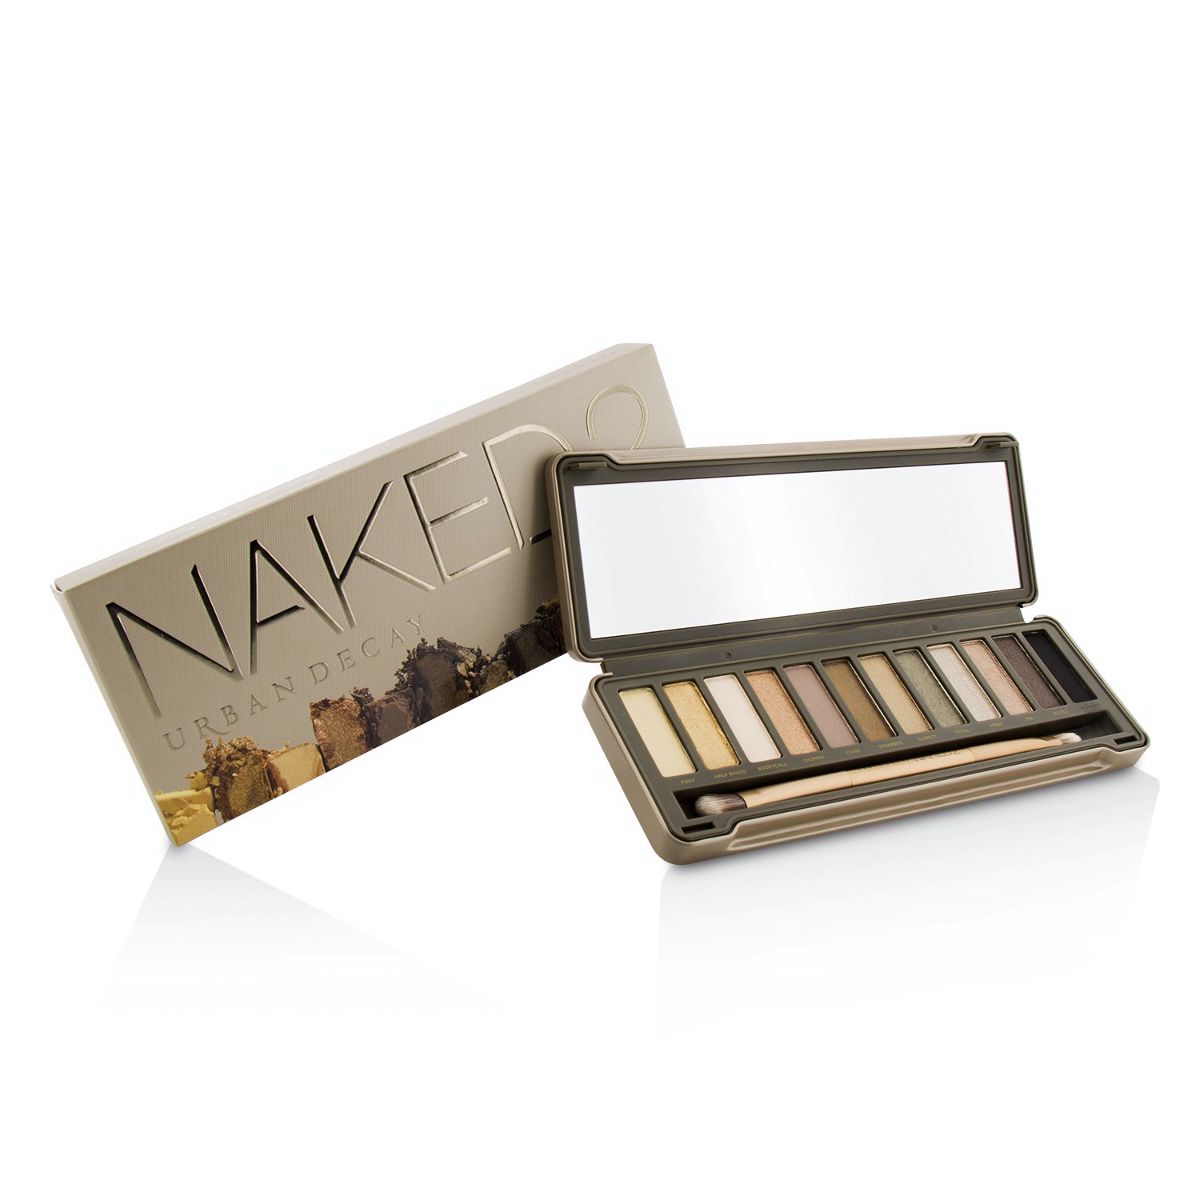 Naked 2 Eyeshadow Palette: 12x Eyeshadow 1x Doubled Ended Shadow/Blending Brush Urban Decay Image